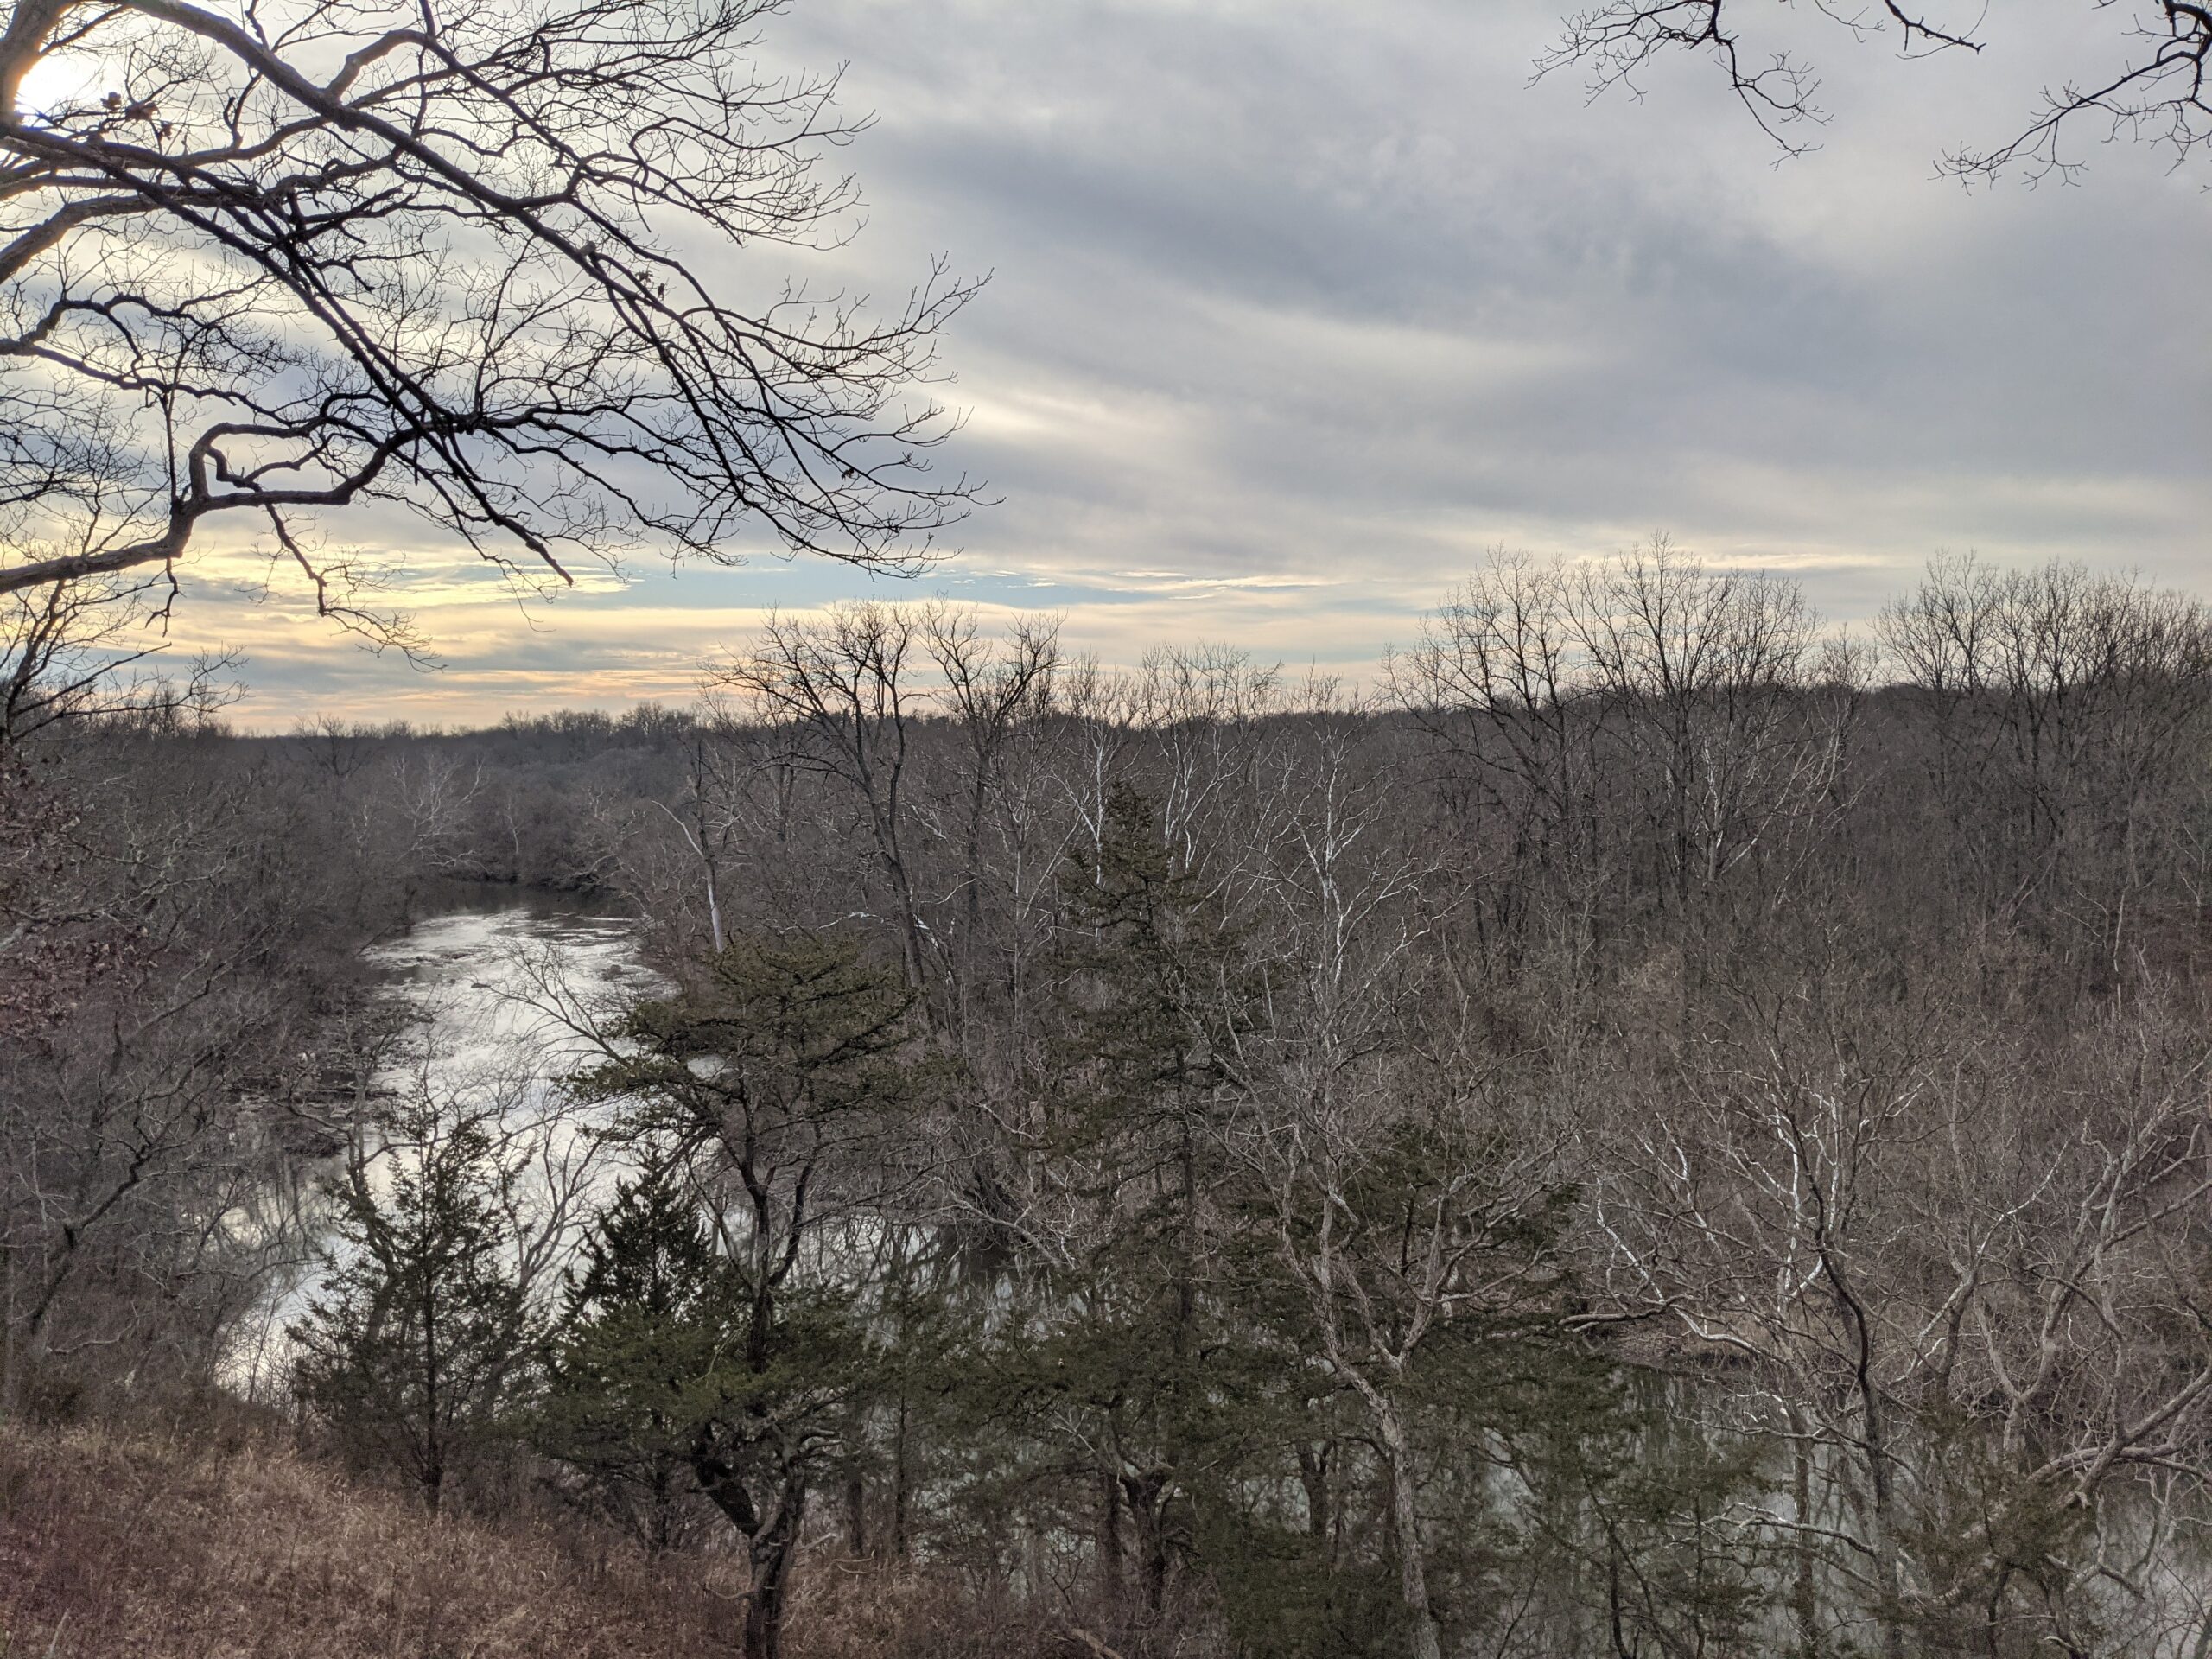 Zoomed out view of a landscape. There is a semi frozen creek running through a hilled landscape. There are barren trees on either side of the creek with a cloudy sky in the background.